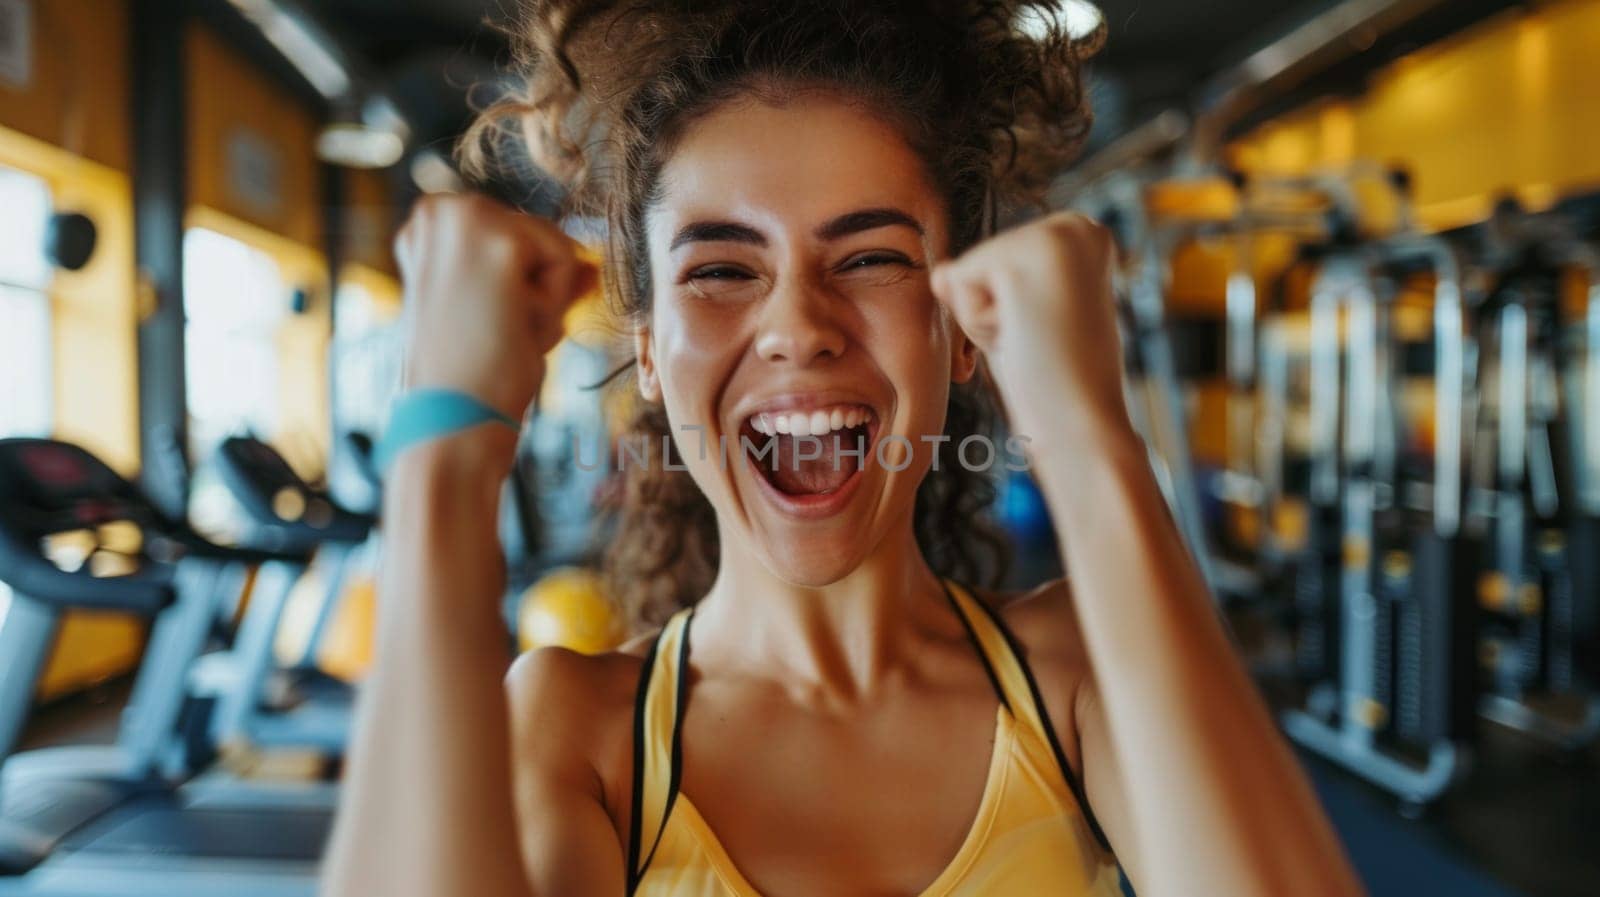 Portrait of a successful woman excited in gym.